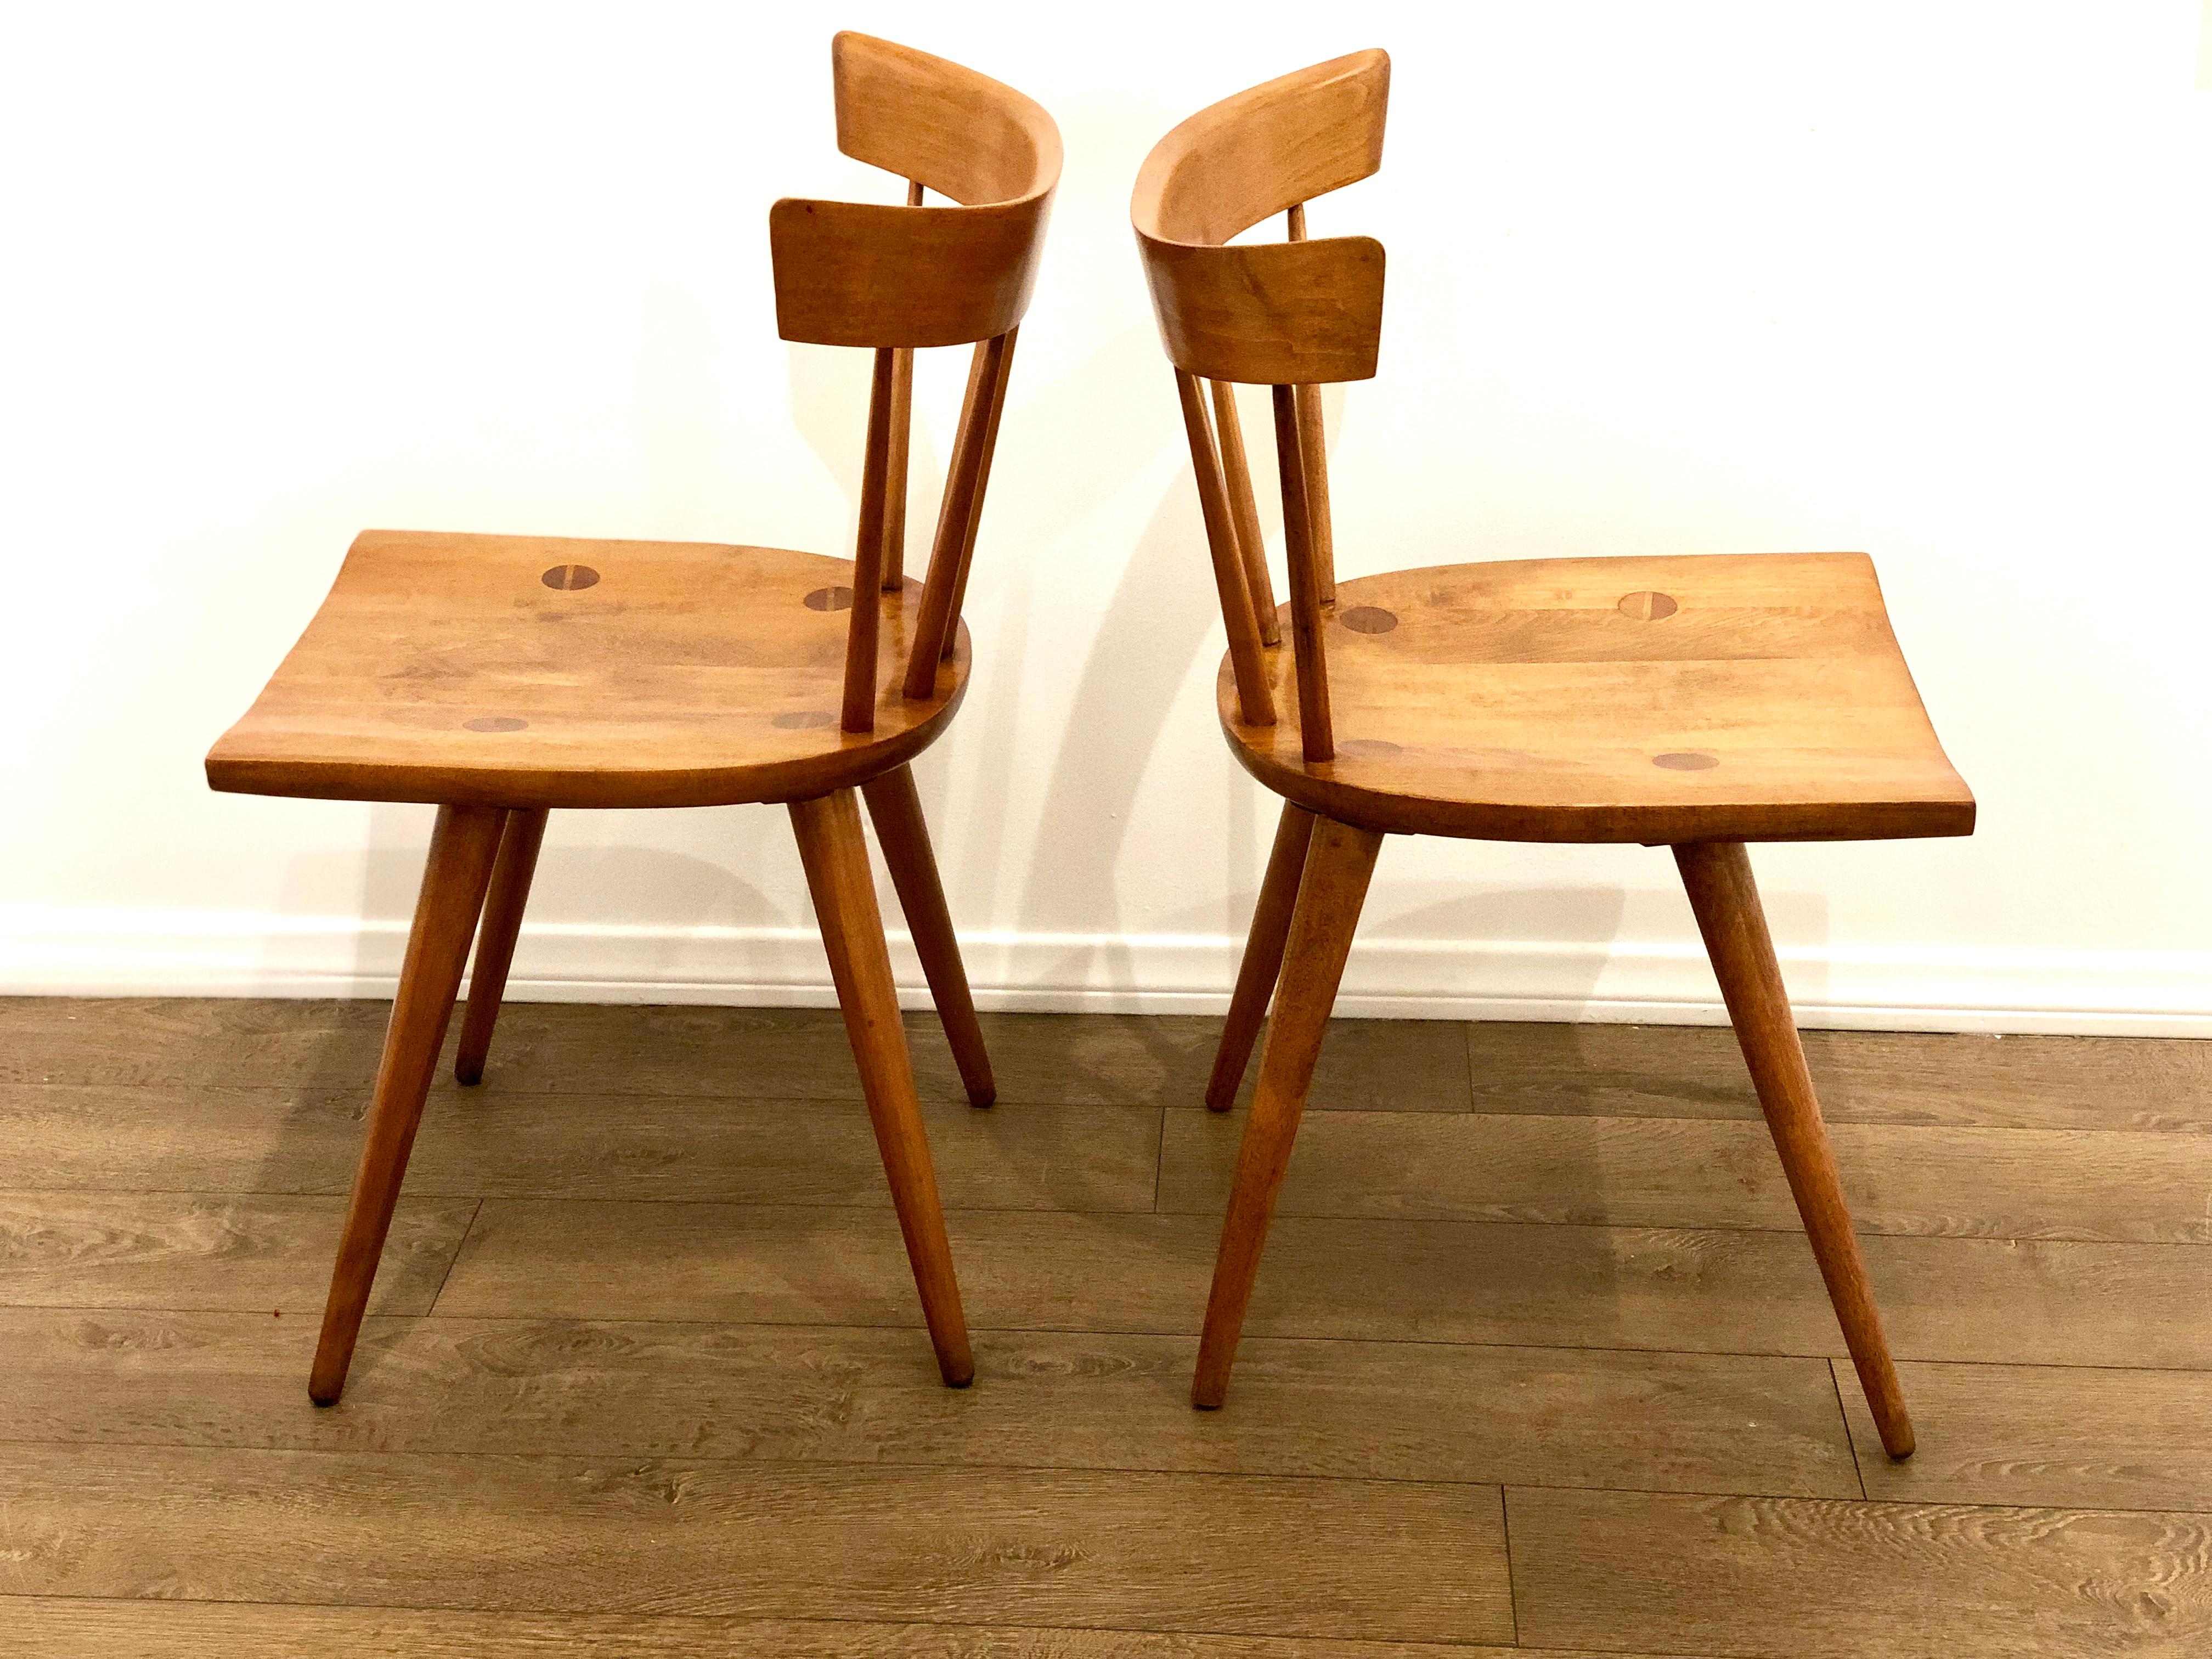 Pair of Paul McCobb Planner group side chairs, circa 1955. Professionally restored and refinished solid and sturdy, with original honey finish. Great to add to your current set, or mix and match for an eclectic look. Excellent vintage condition.